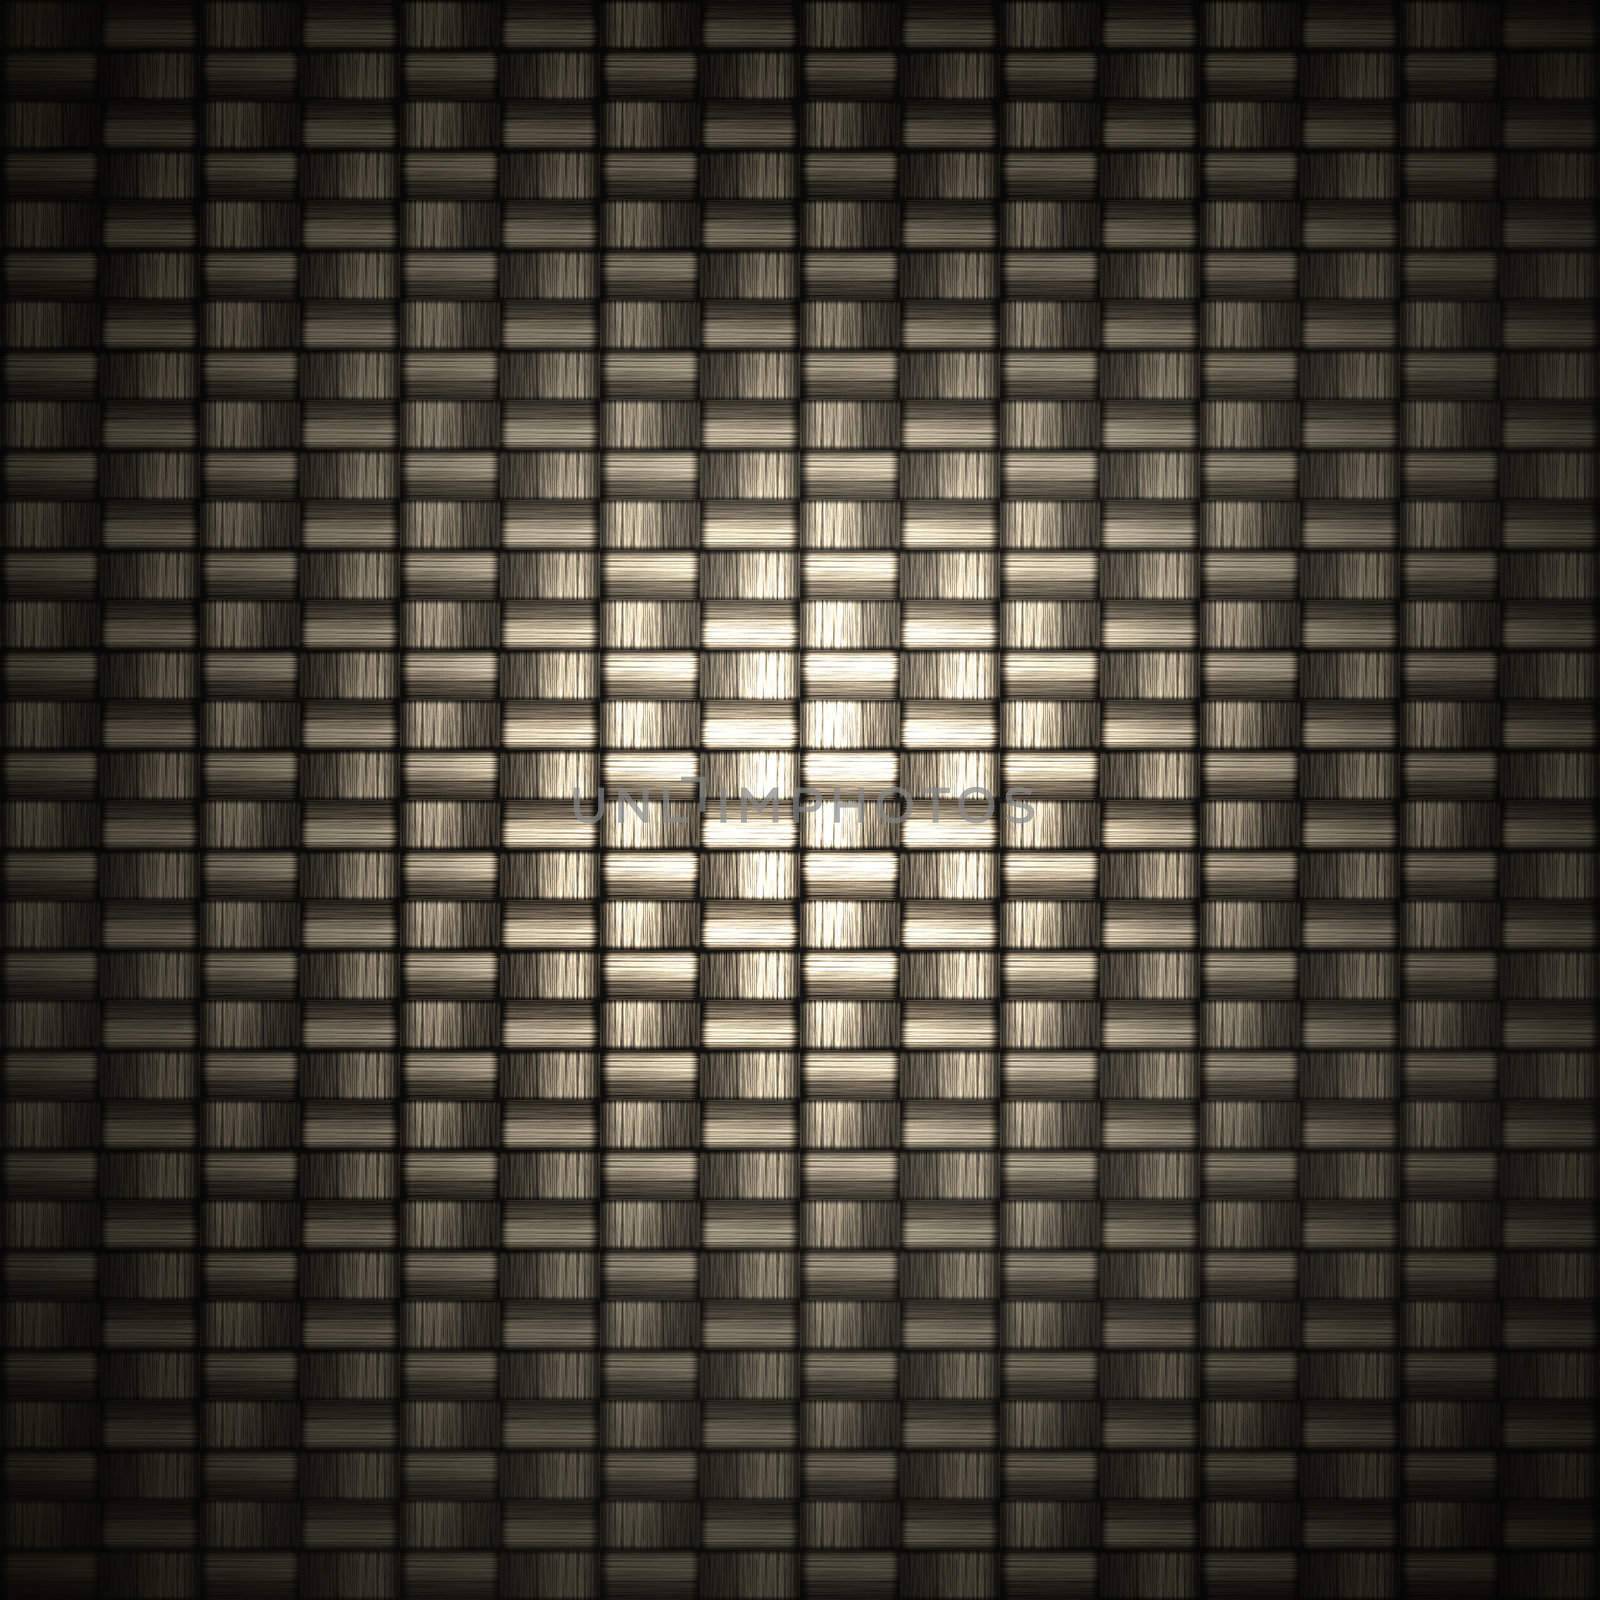 A detailed carbon fiber background texture - a great art element for that high-tech look you are going for in your print or web design piece.